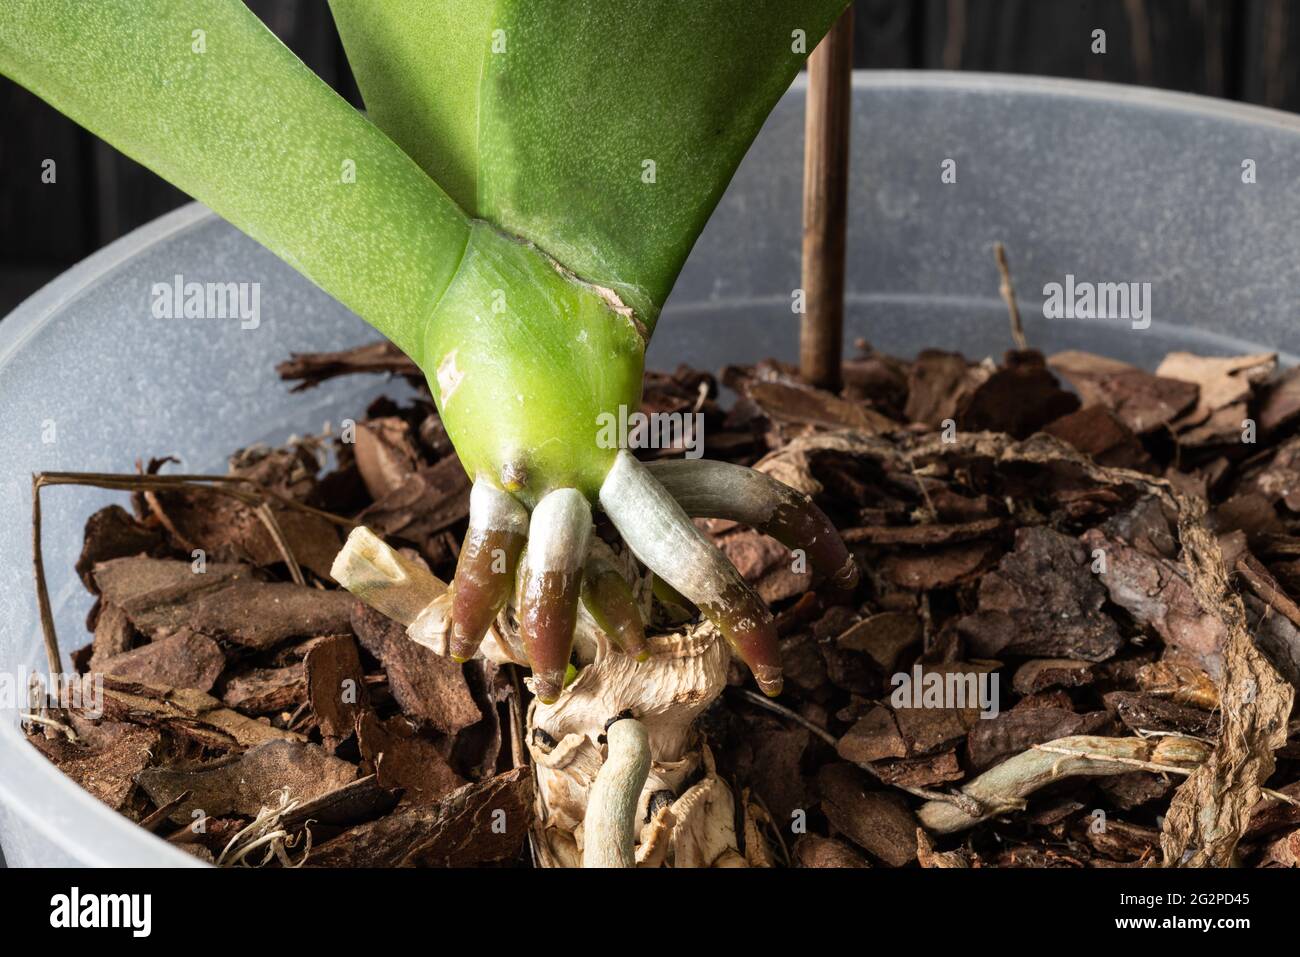 Growing aerial roots of the phalaenopsis orchid. Stimulation of plant growth. Stock Photo